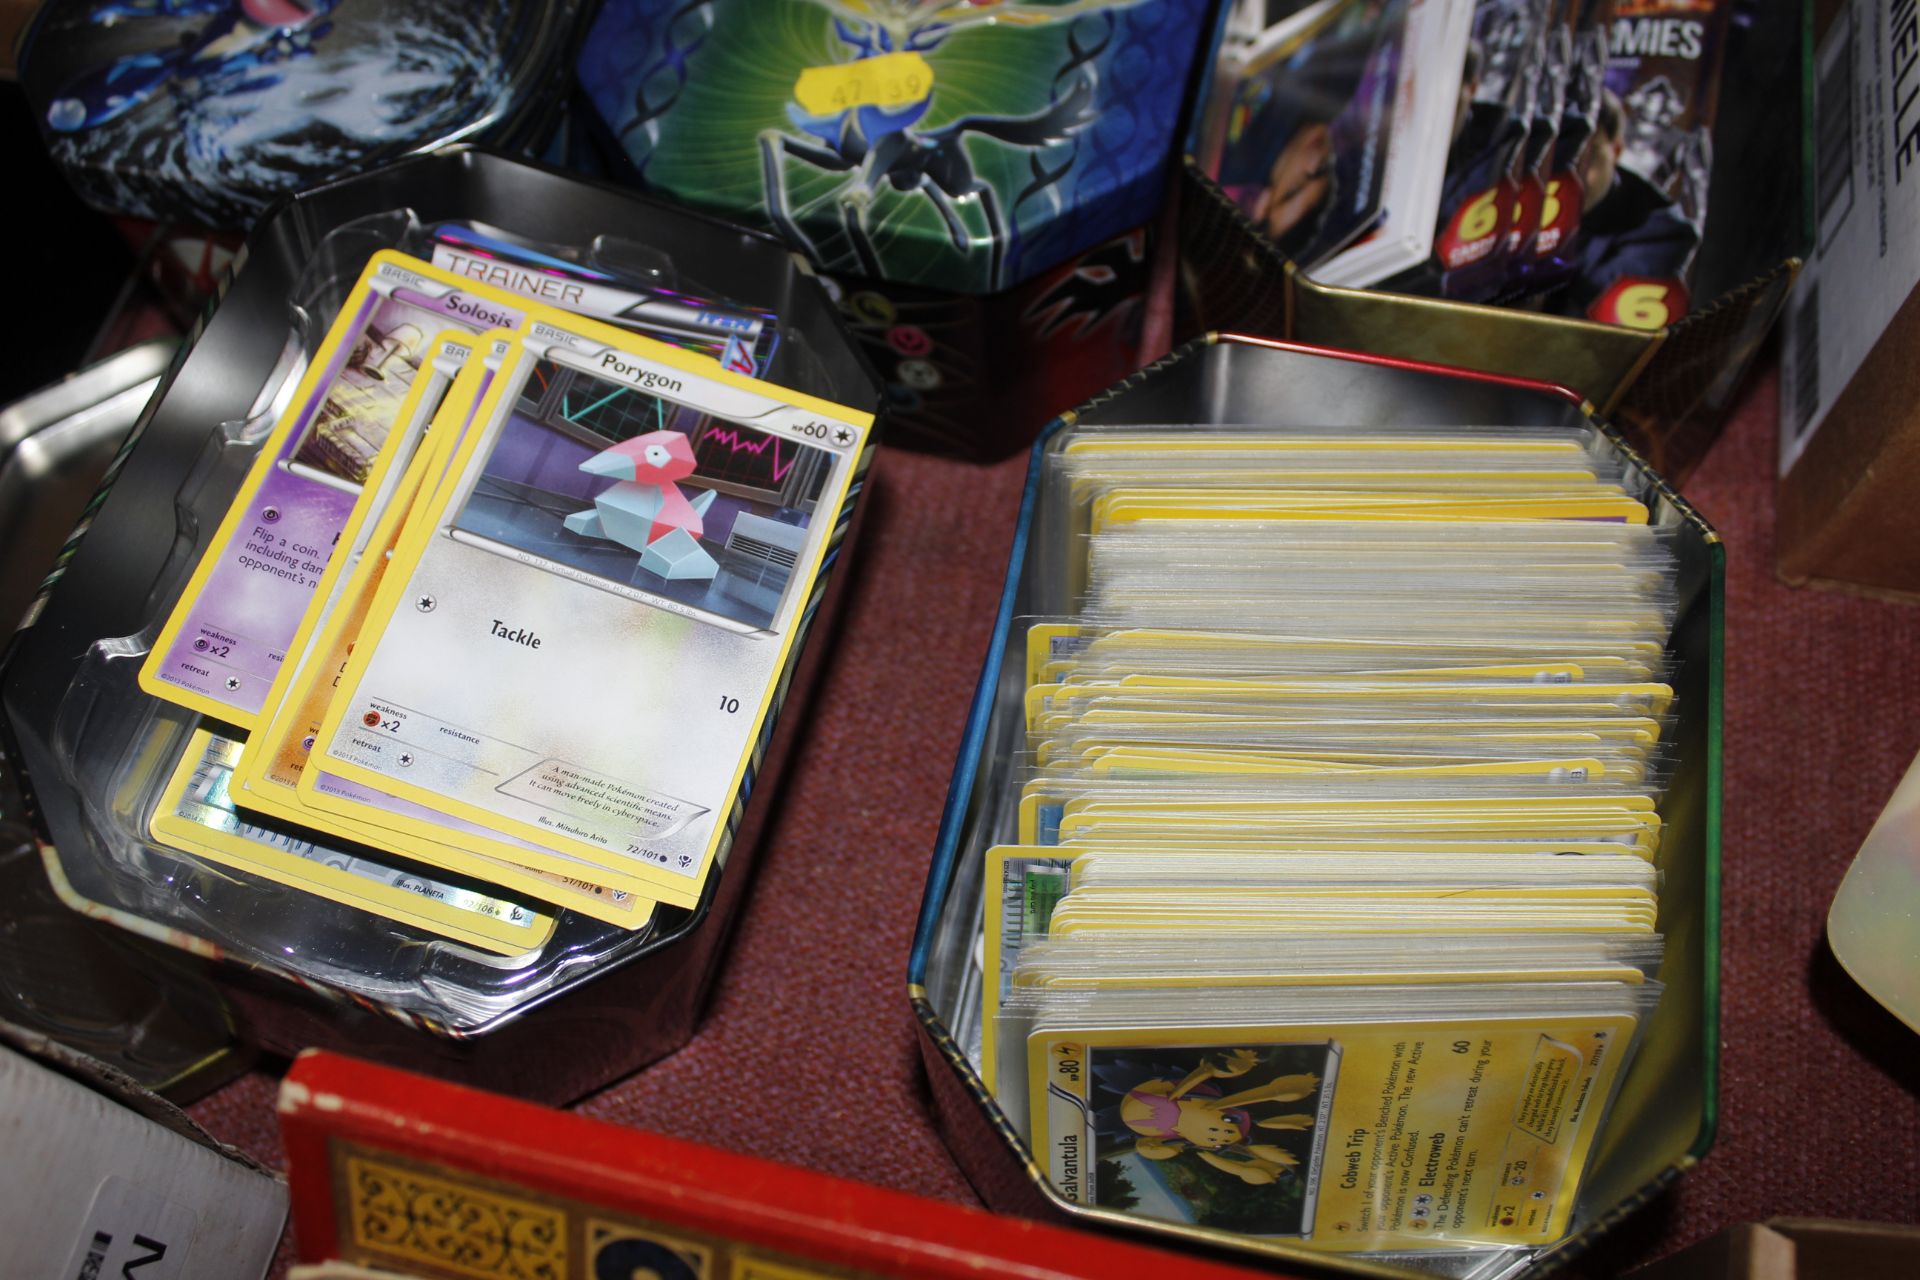 A collection of Pokémon cards and Dr Who items - Image 6 of 7